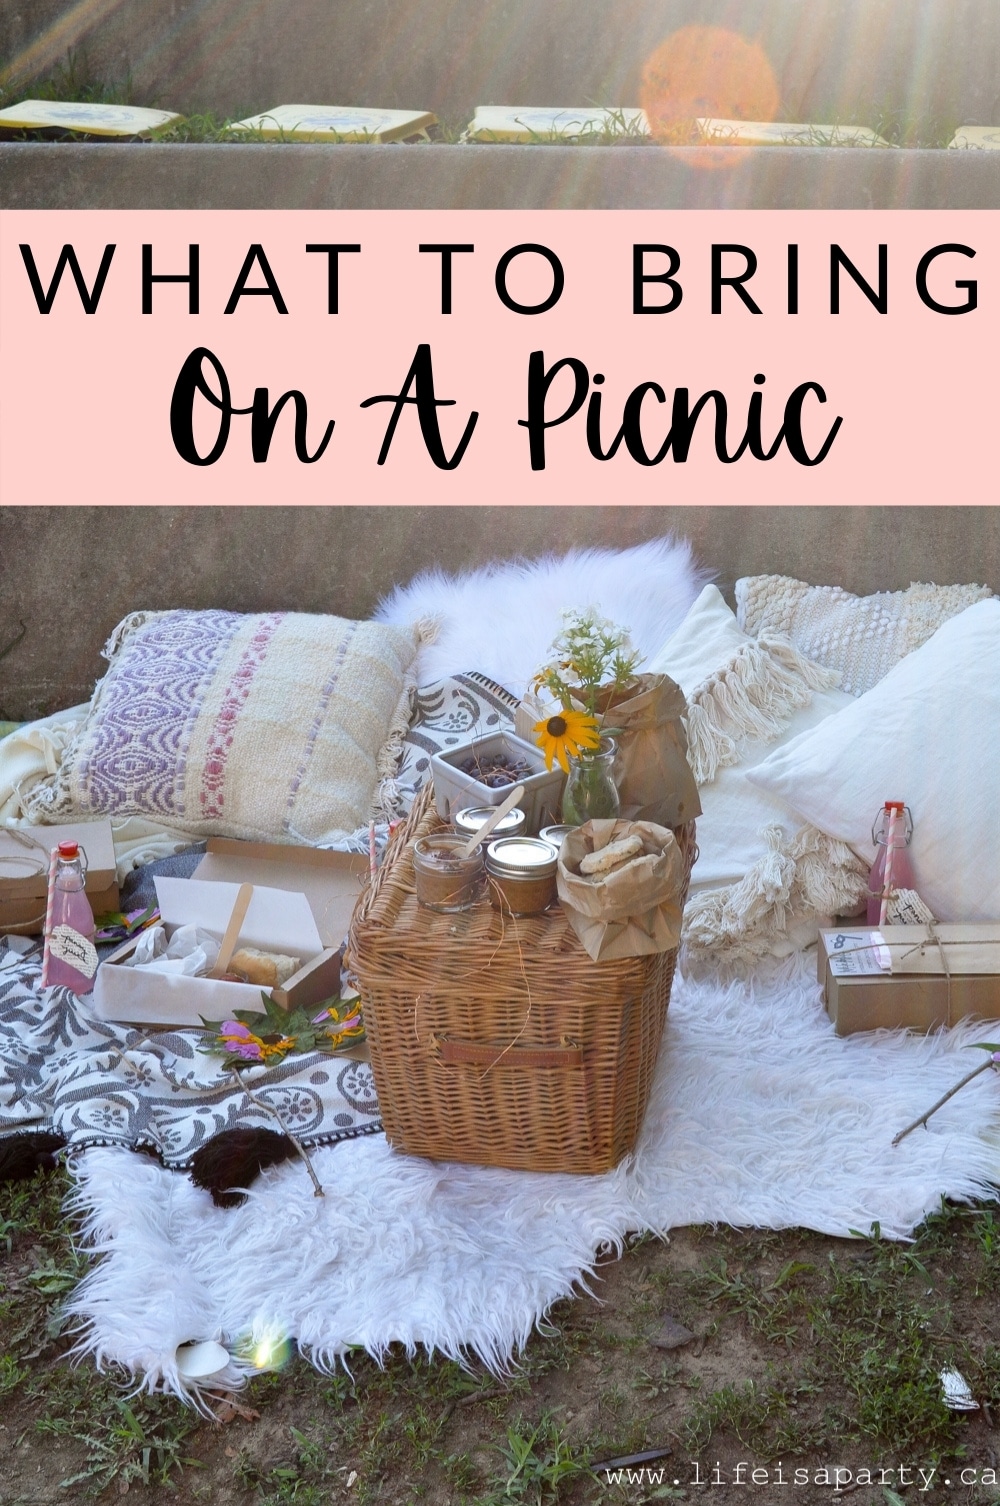 What to bring on a picnic